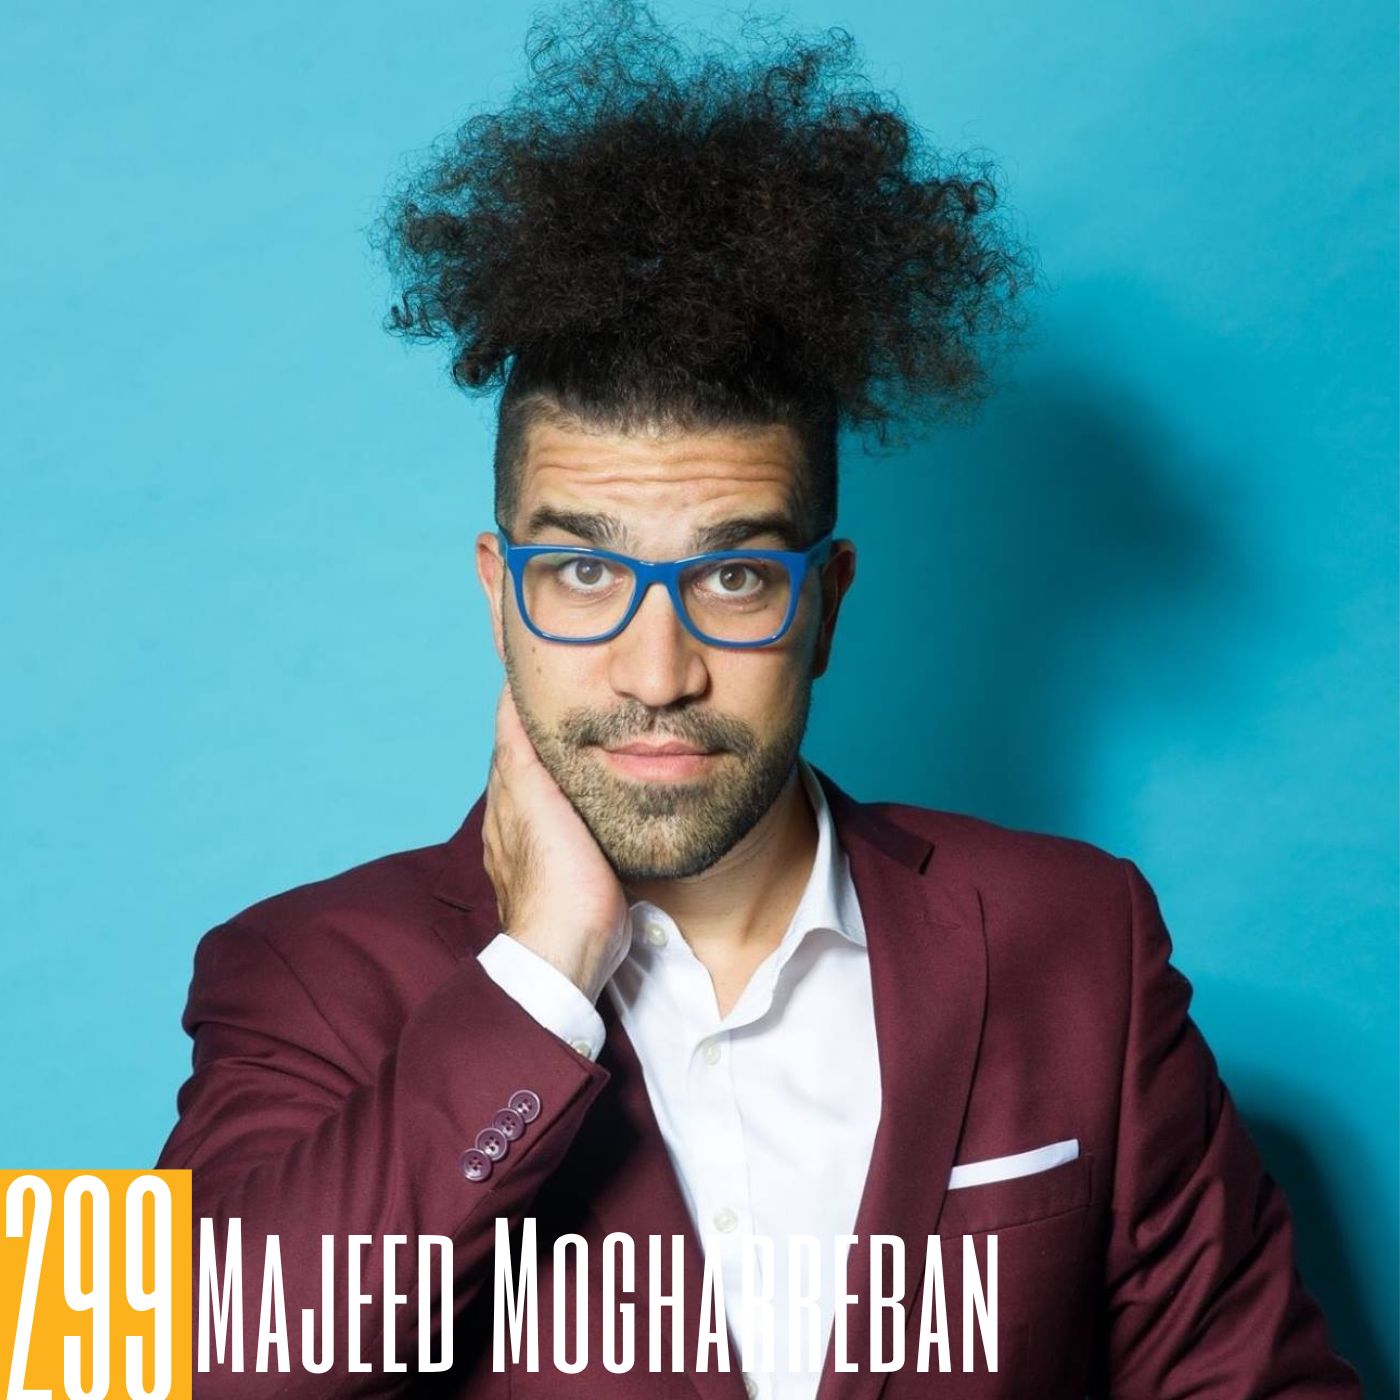 299 Majeed Mogharreban - The Power of Becoming: Providing Humor & Inspiration to the Masses